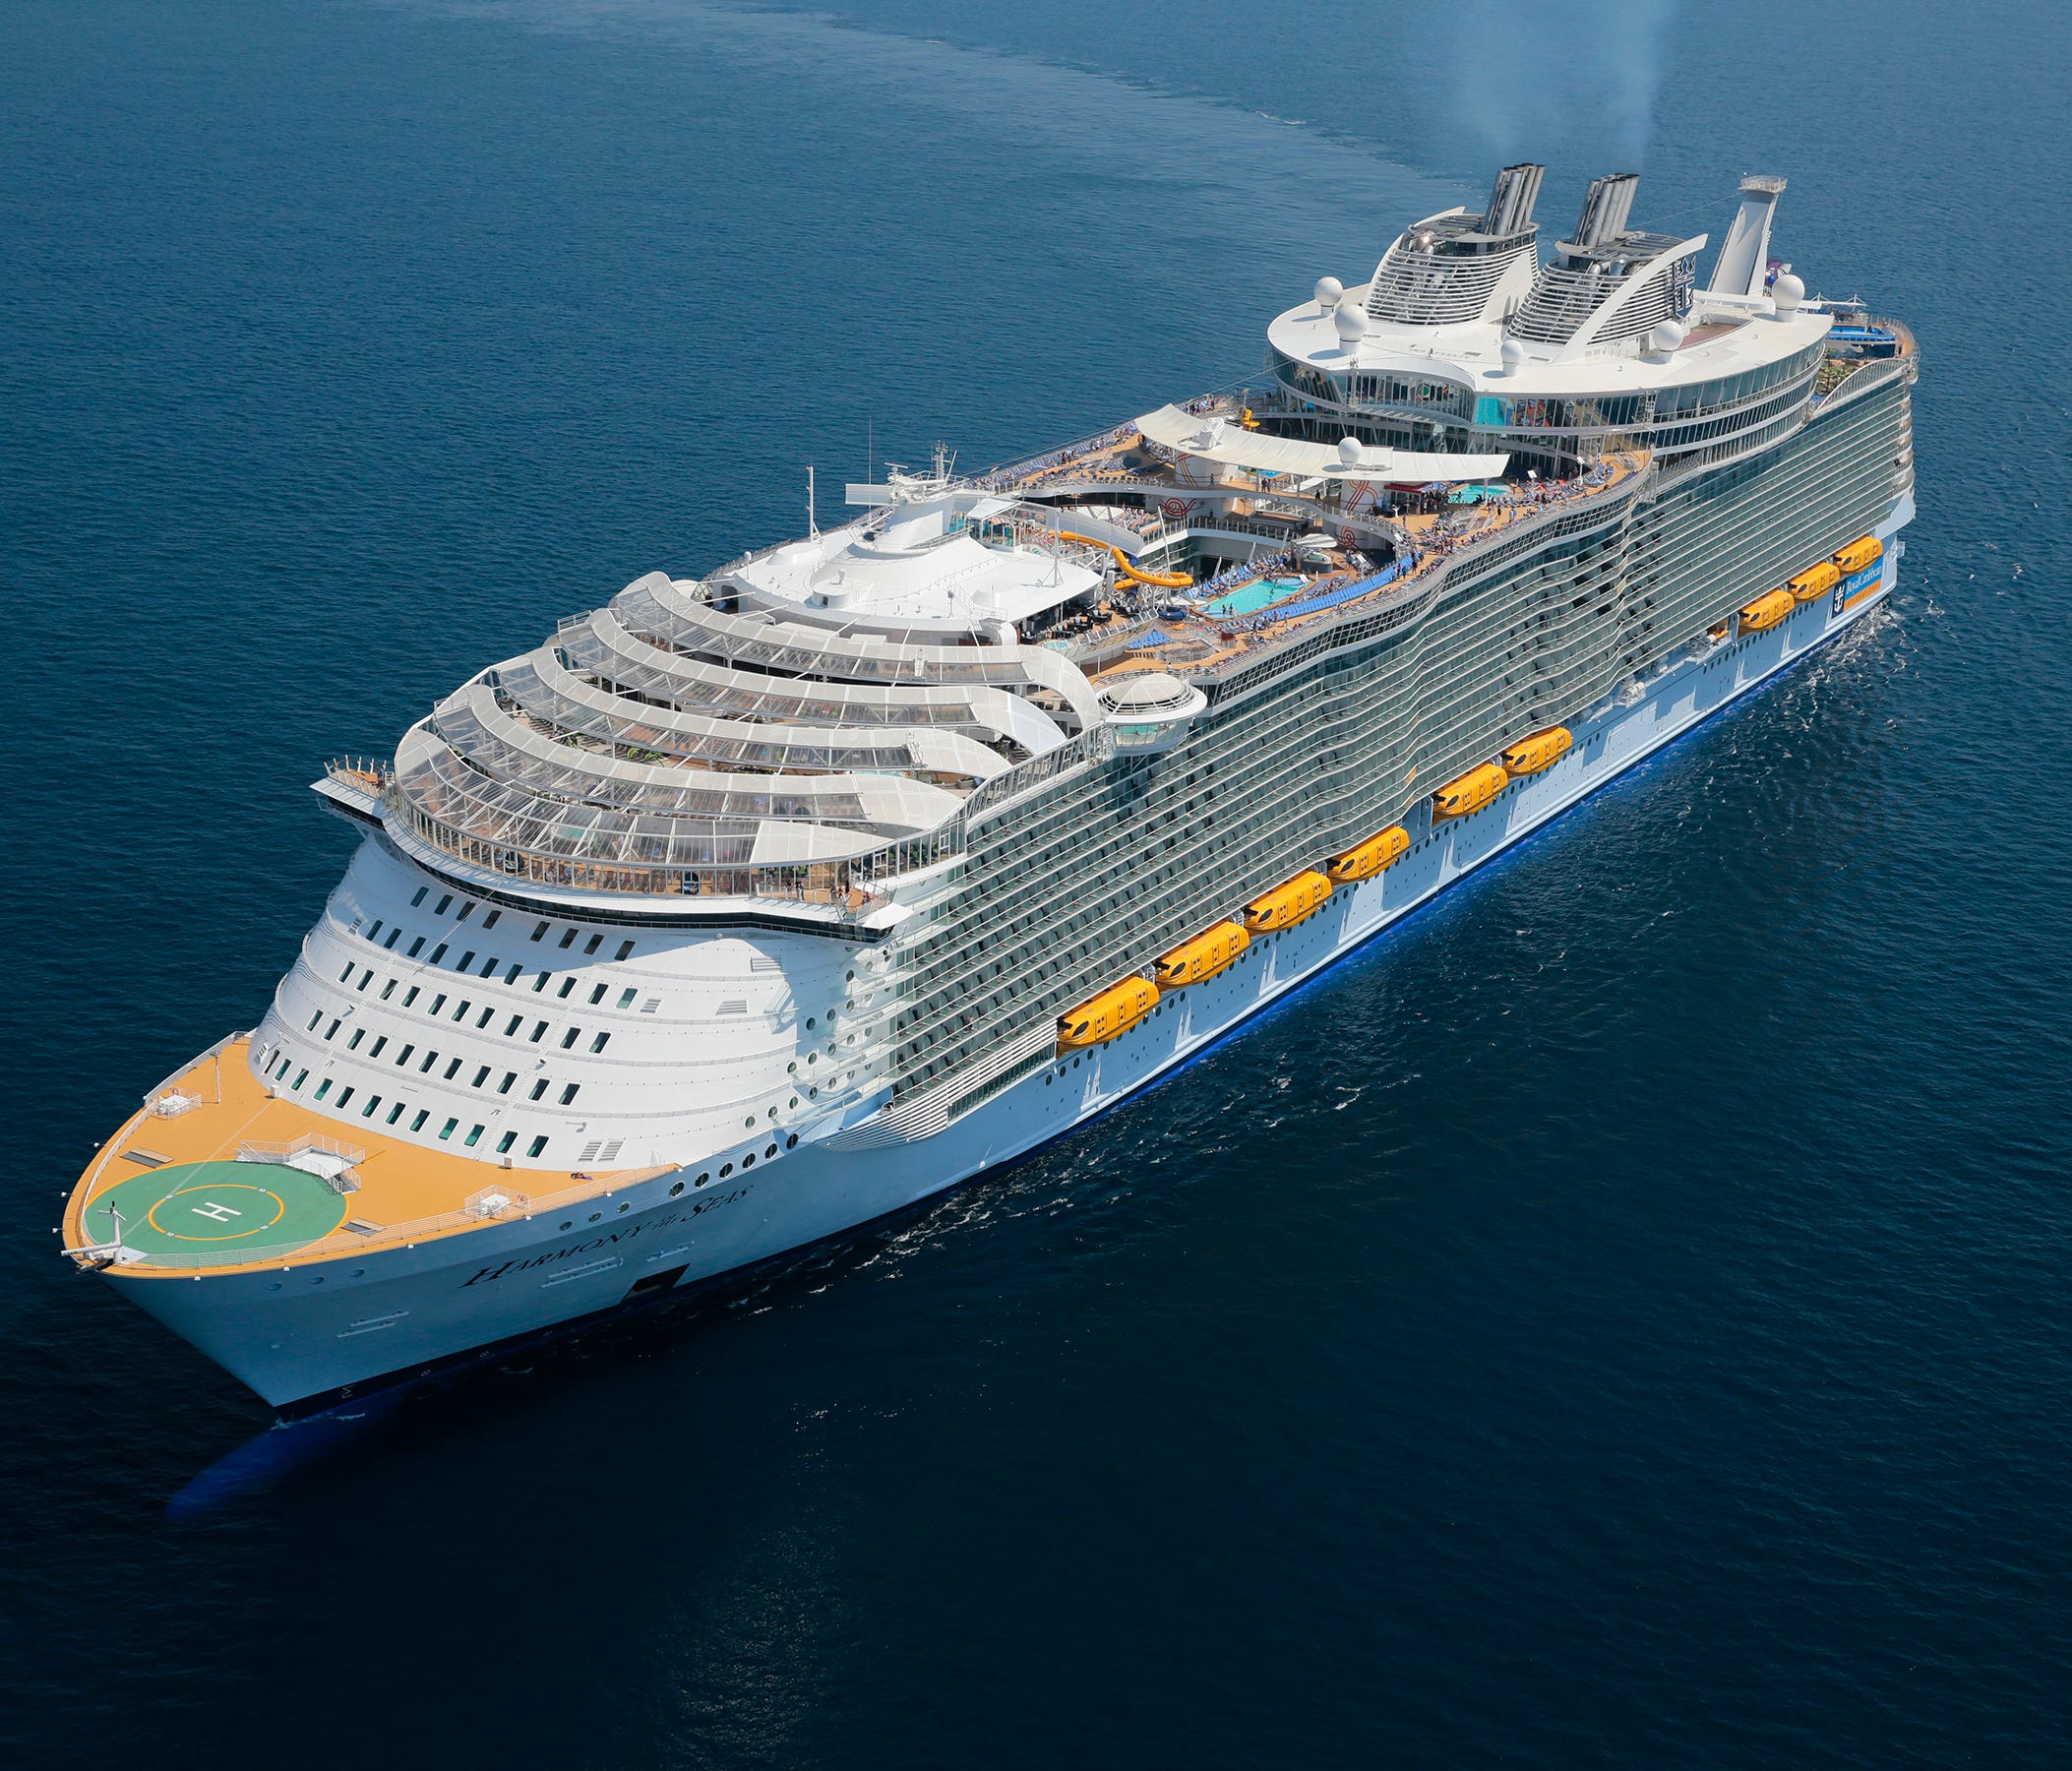 Royal Caribbean's 226,963-ton Harmony of the Seas debuted in May 2016.